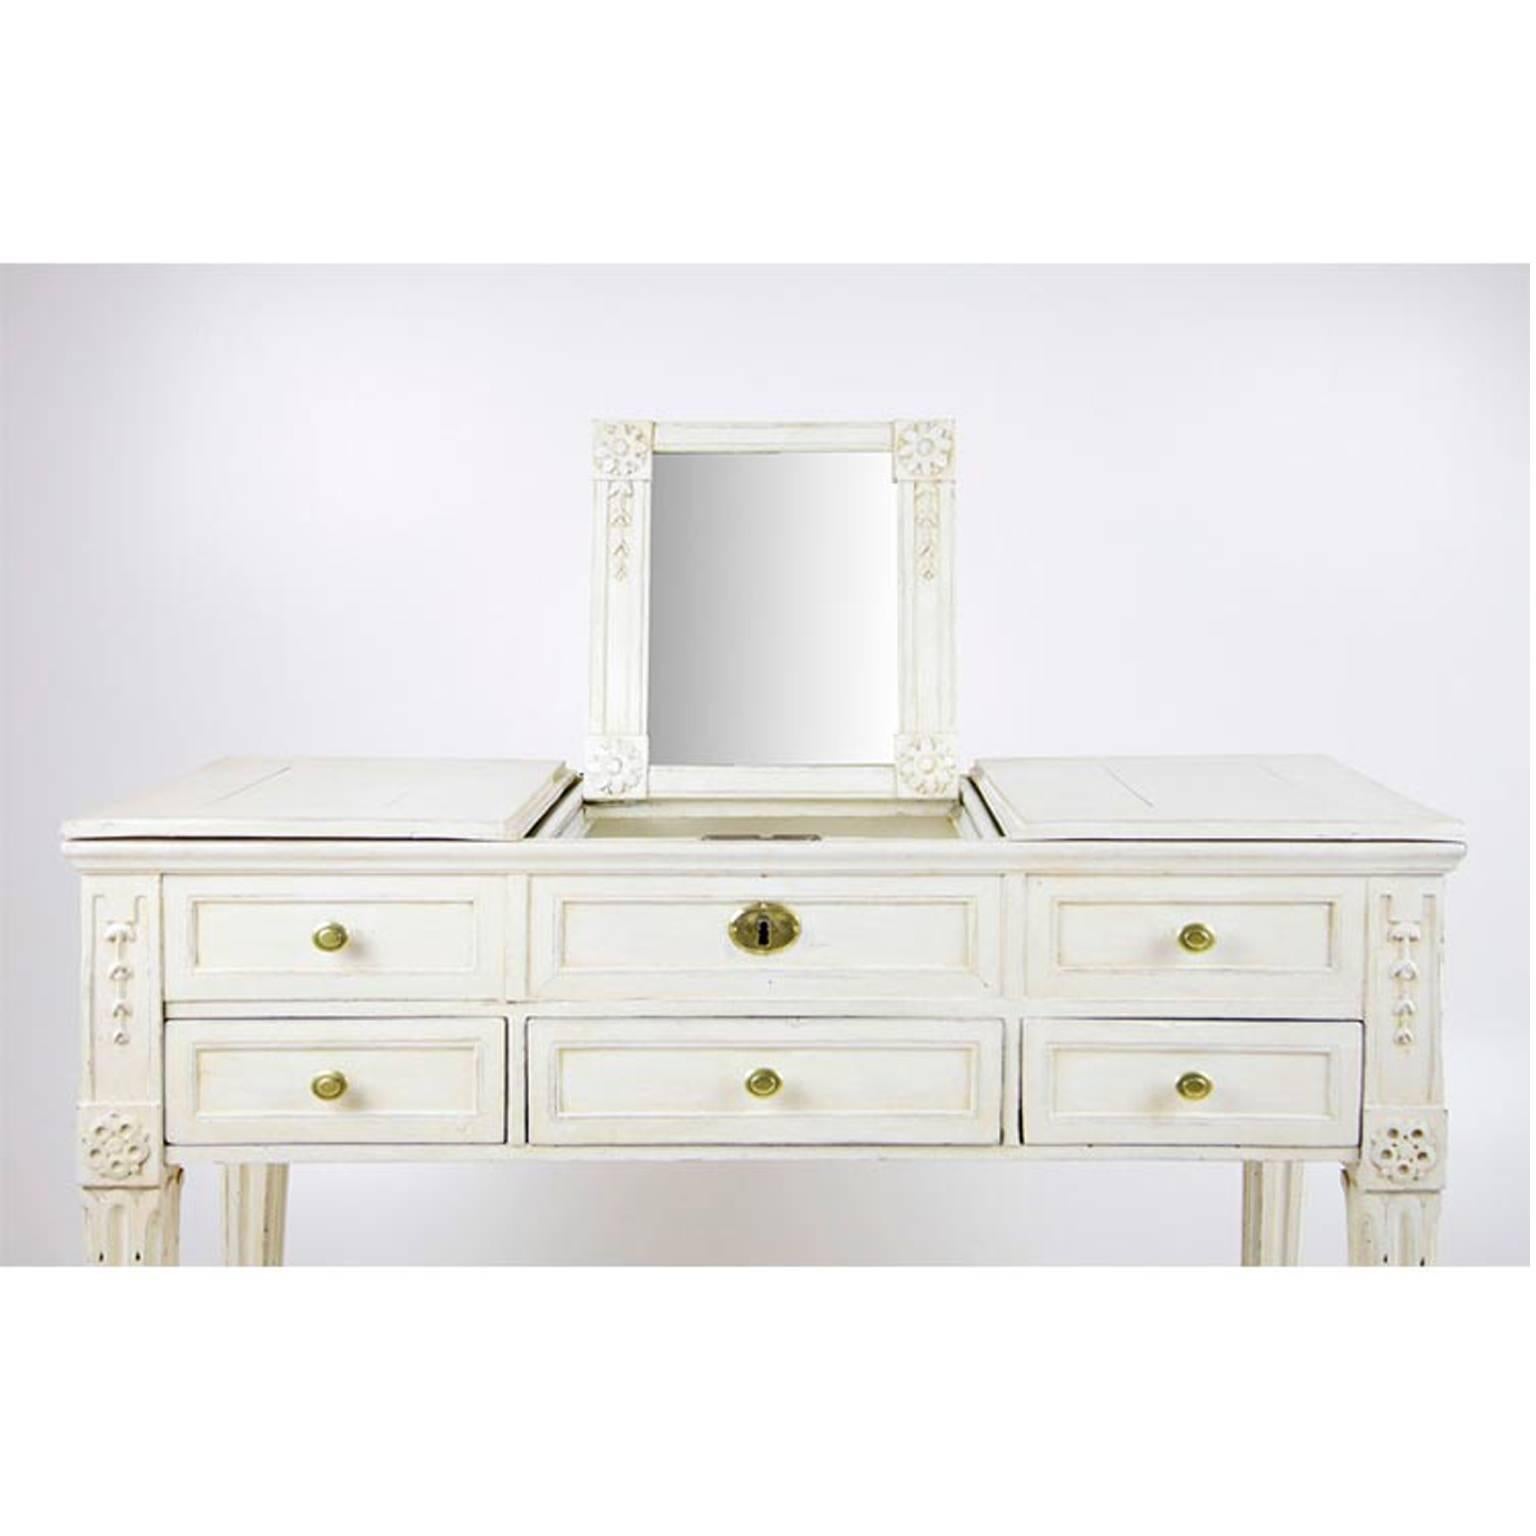 Lovely German Louis XVI vanity table or Poudreuse on fluted tapered legs. The middle section has a foldable mirror and plenty of storage space.
The white color is restored.